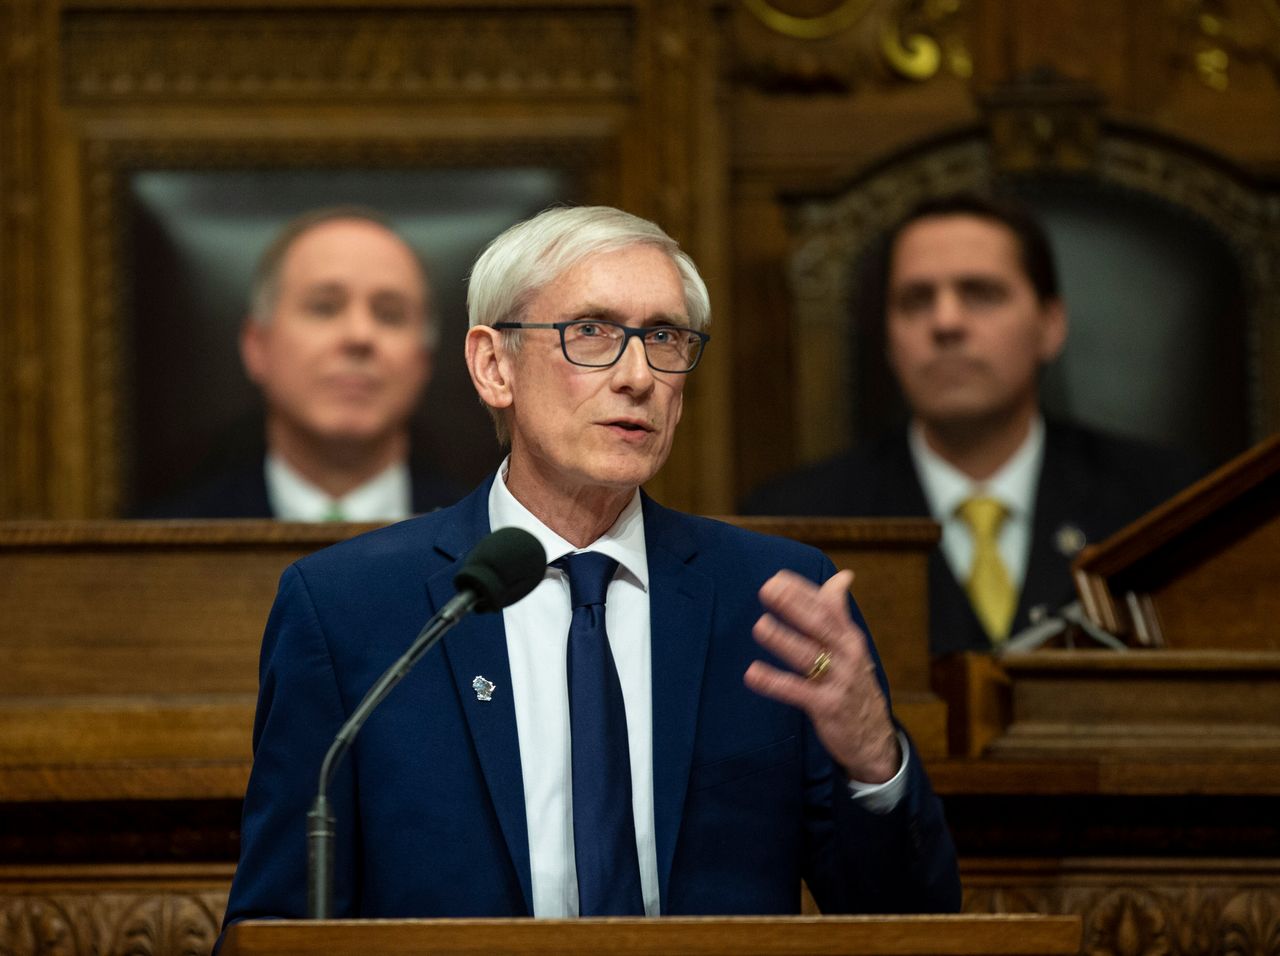 As Wisconsin Gov. Tony Evers (D) speaks in 2019, Republican state legislative leaders look on behind him. GOP leaders often refuse to engage with Evers' proposals.